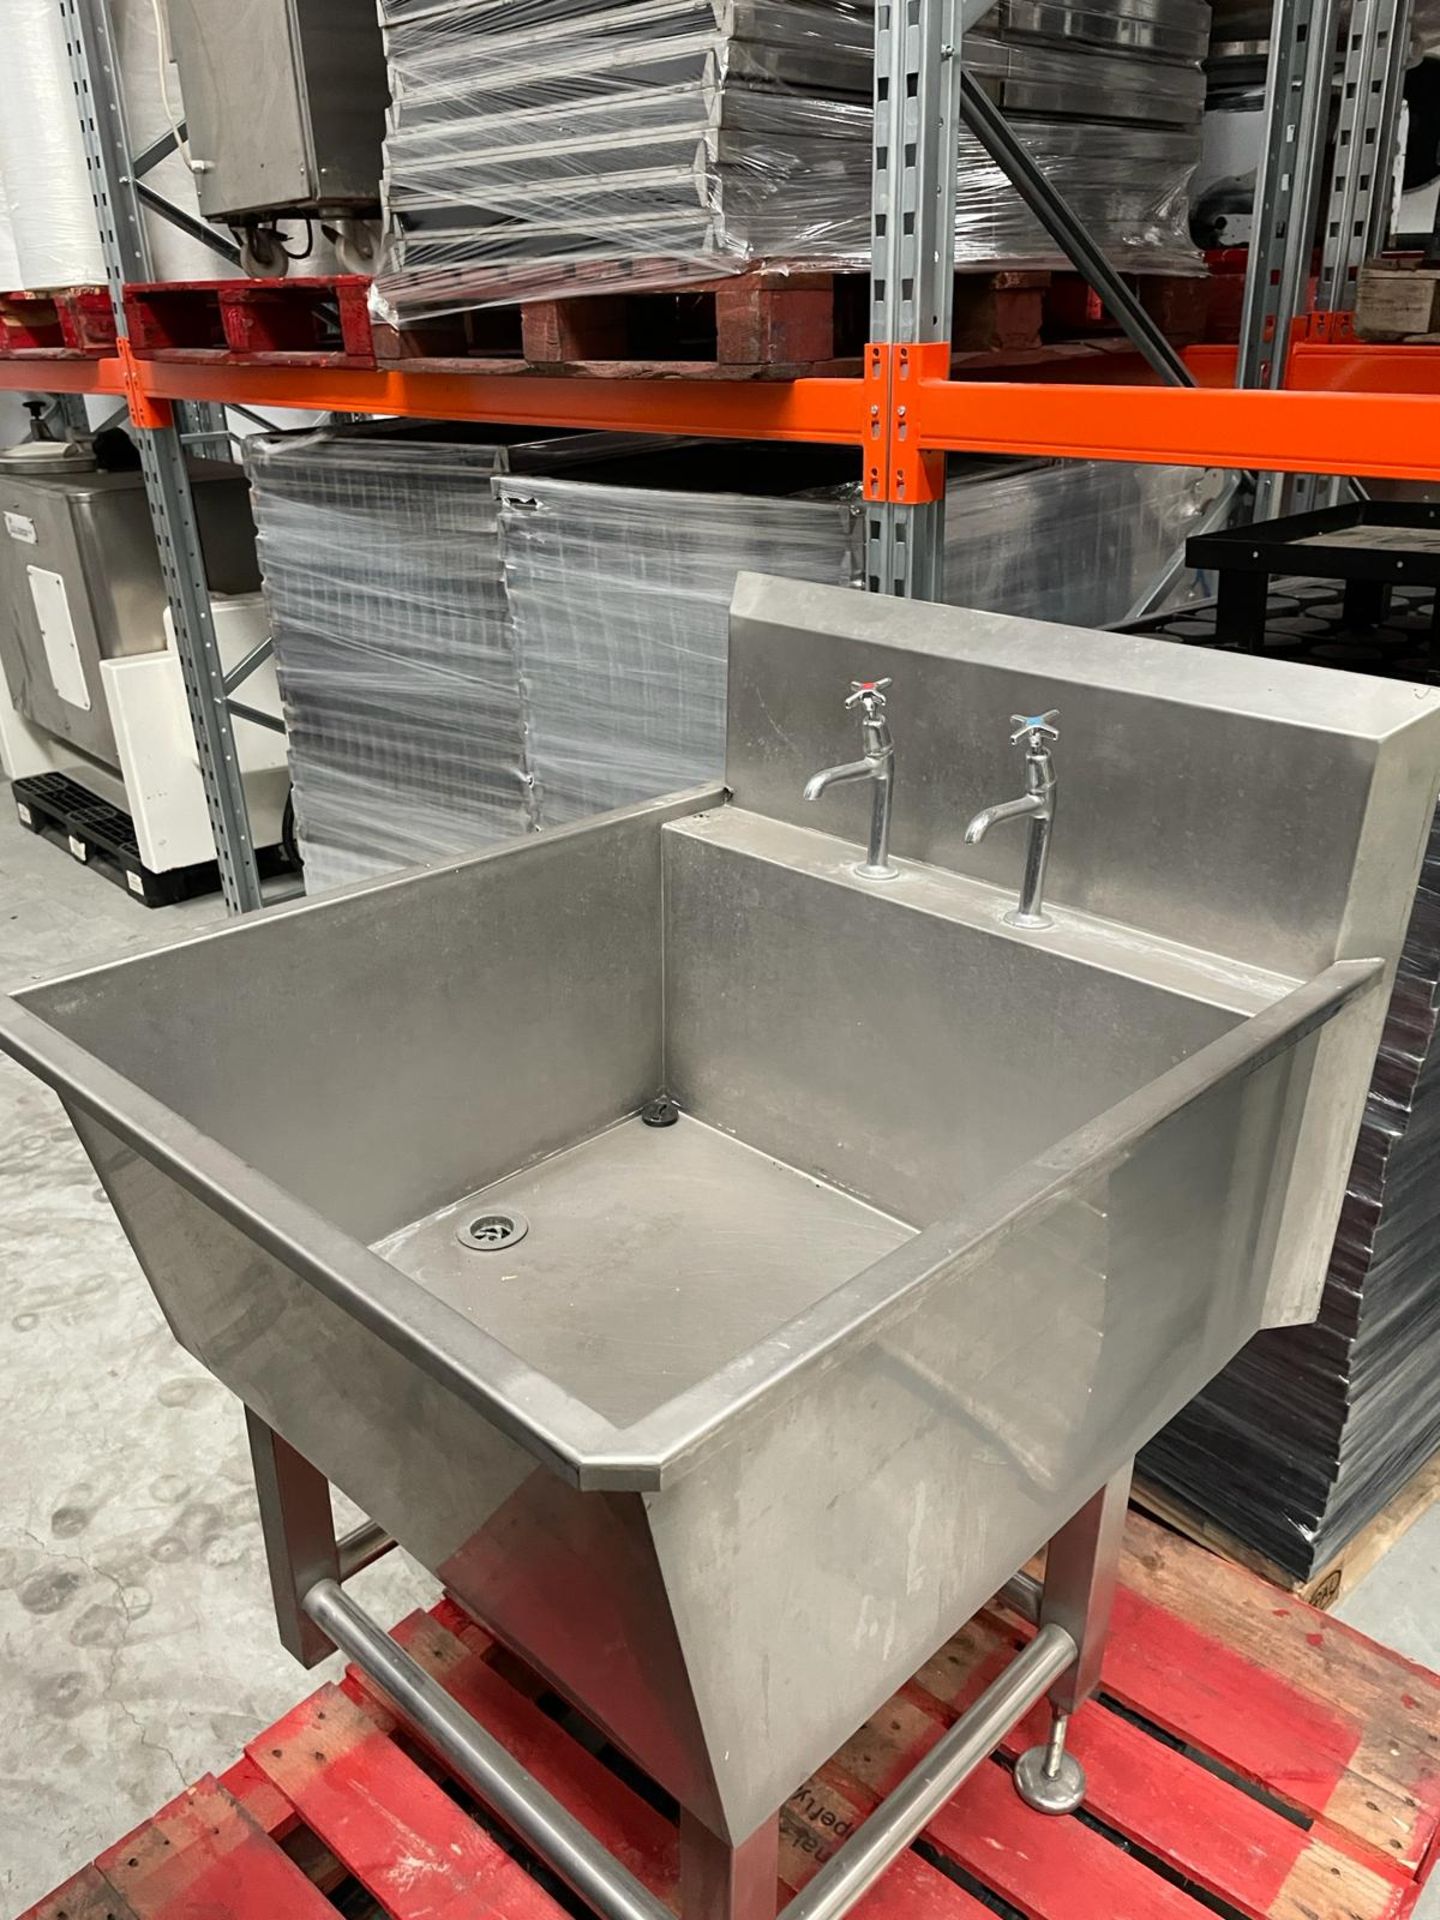 Stainless Steel Sink . Approx.750 x 900 x 1100 mm with 200 mm Splashback 450 deep. Missing leg. - Image 4 of 4